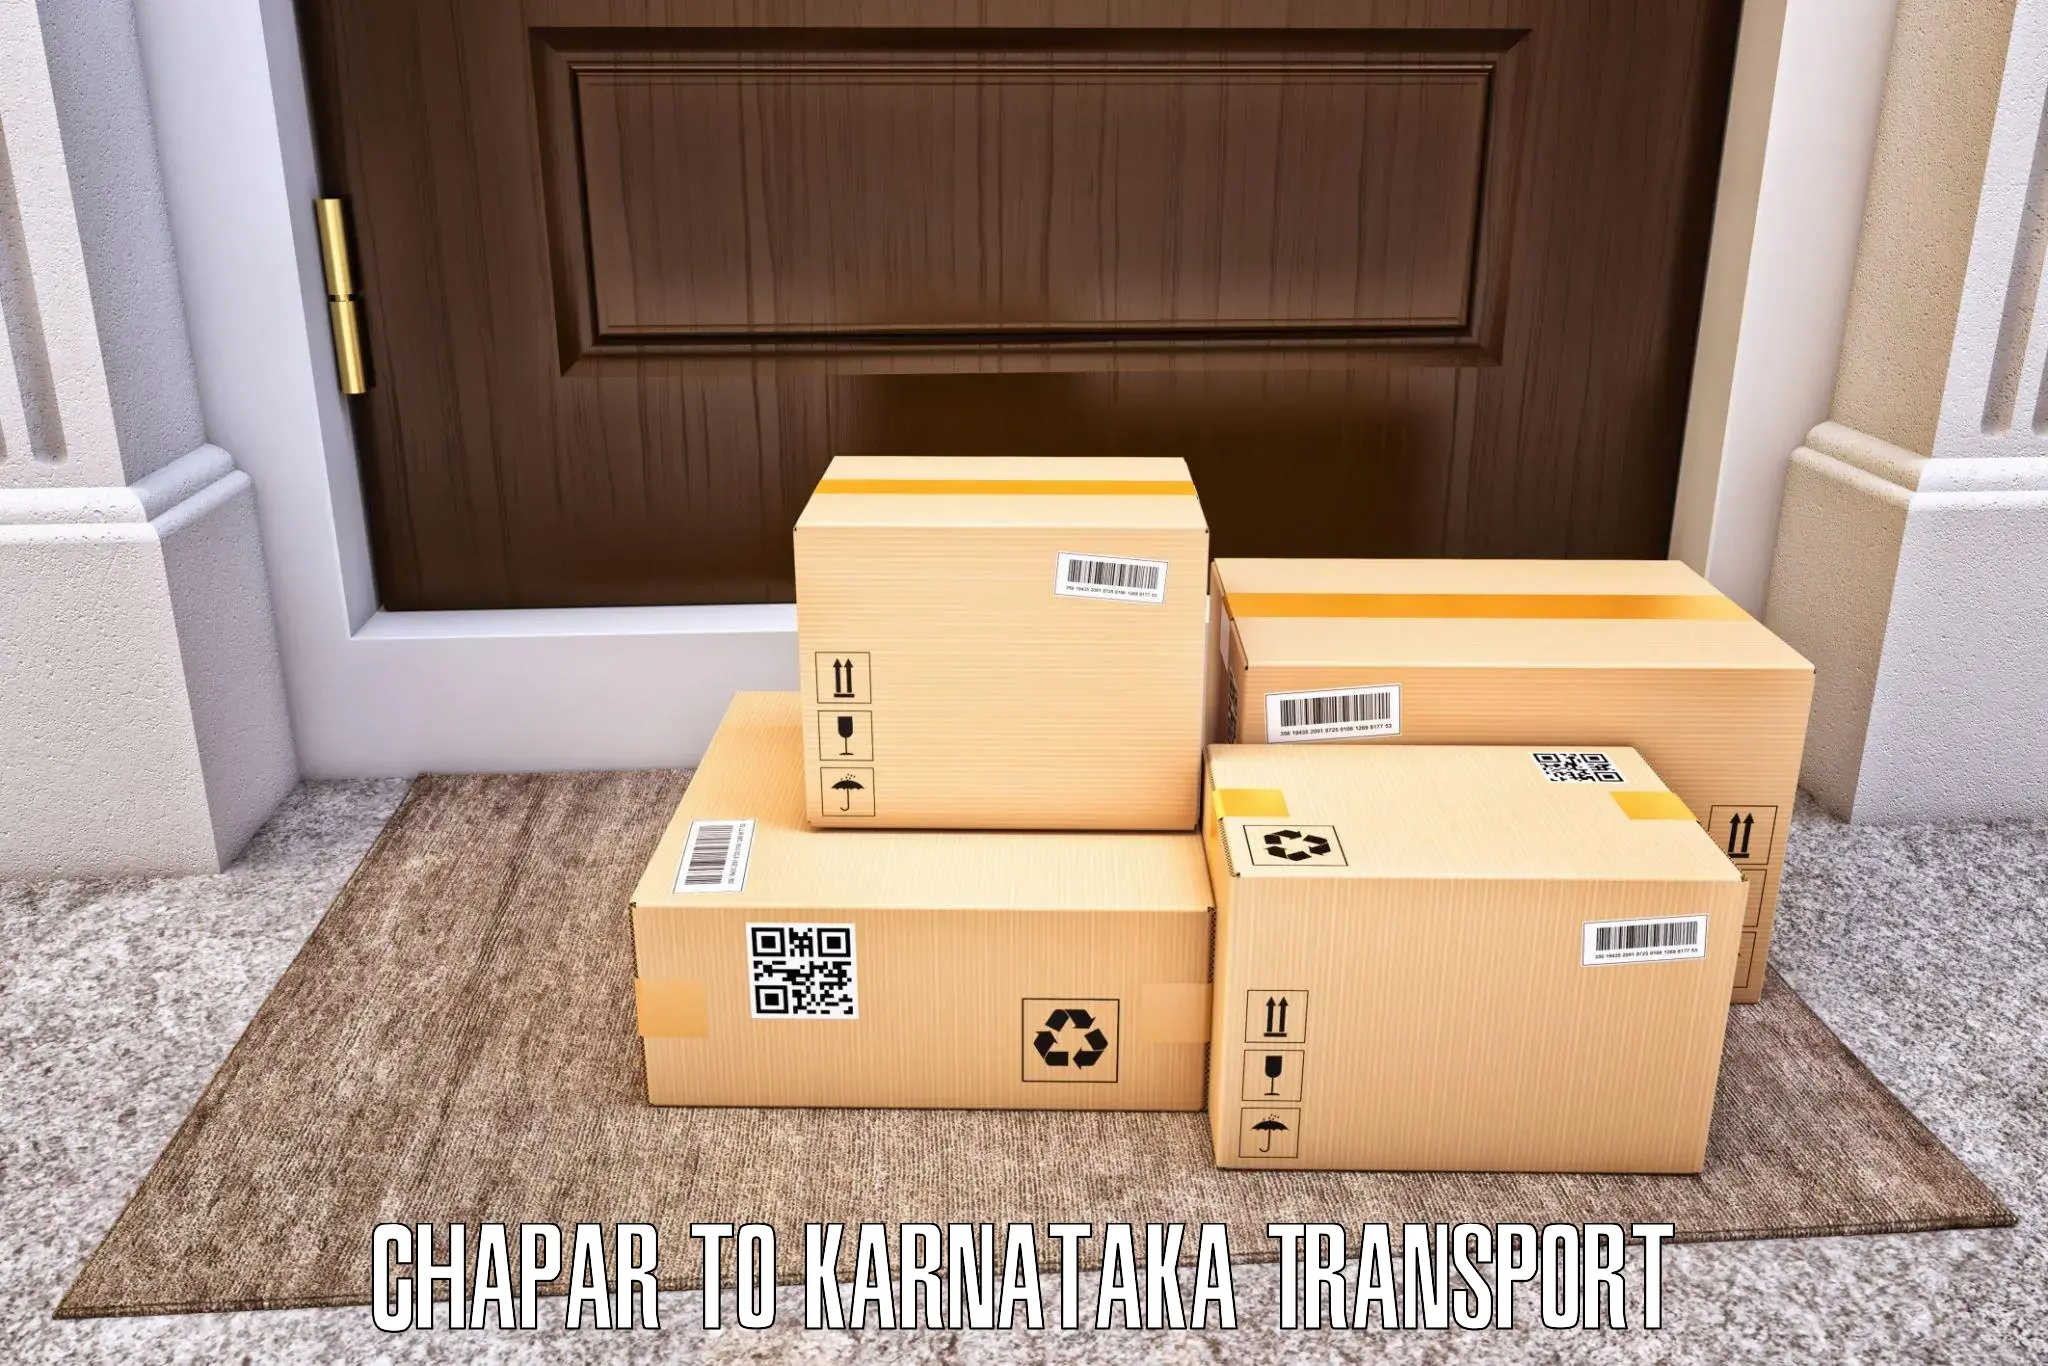 Container transportation services Chapar to Channapatna